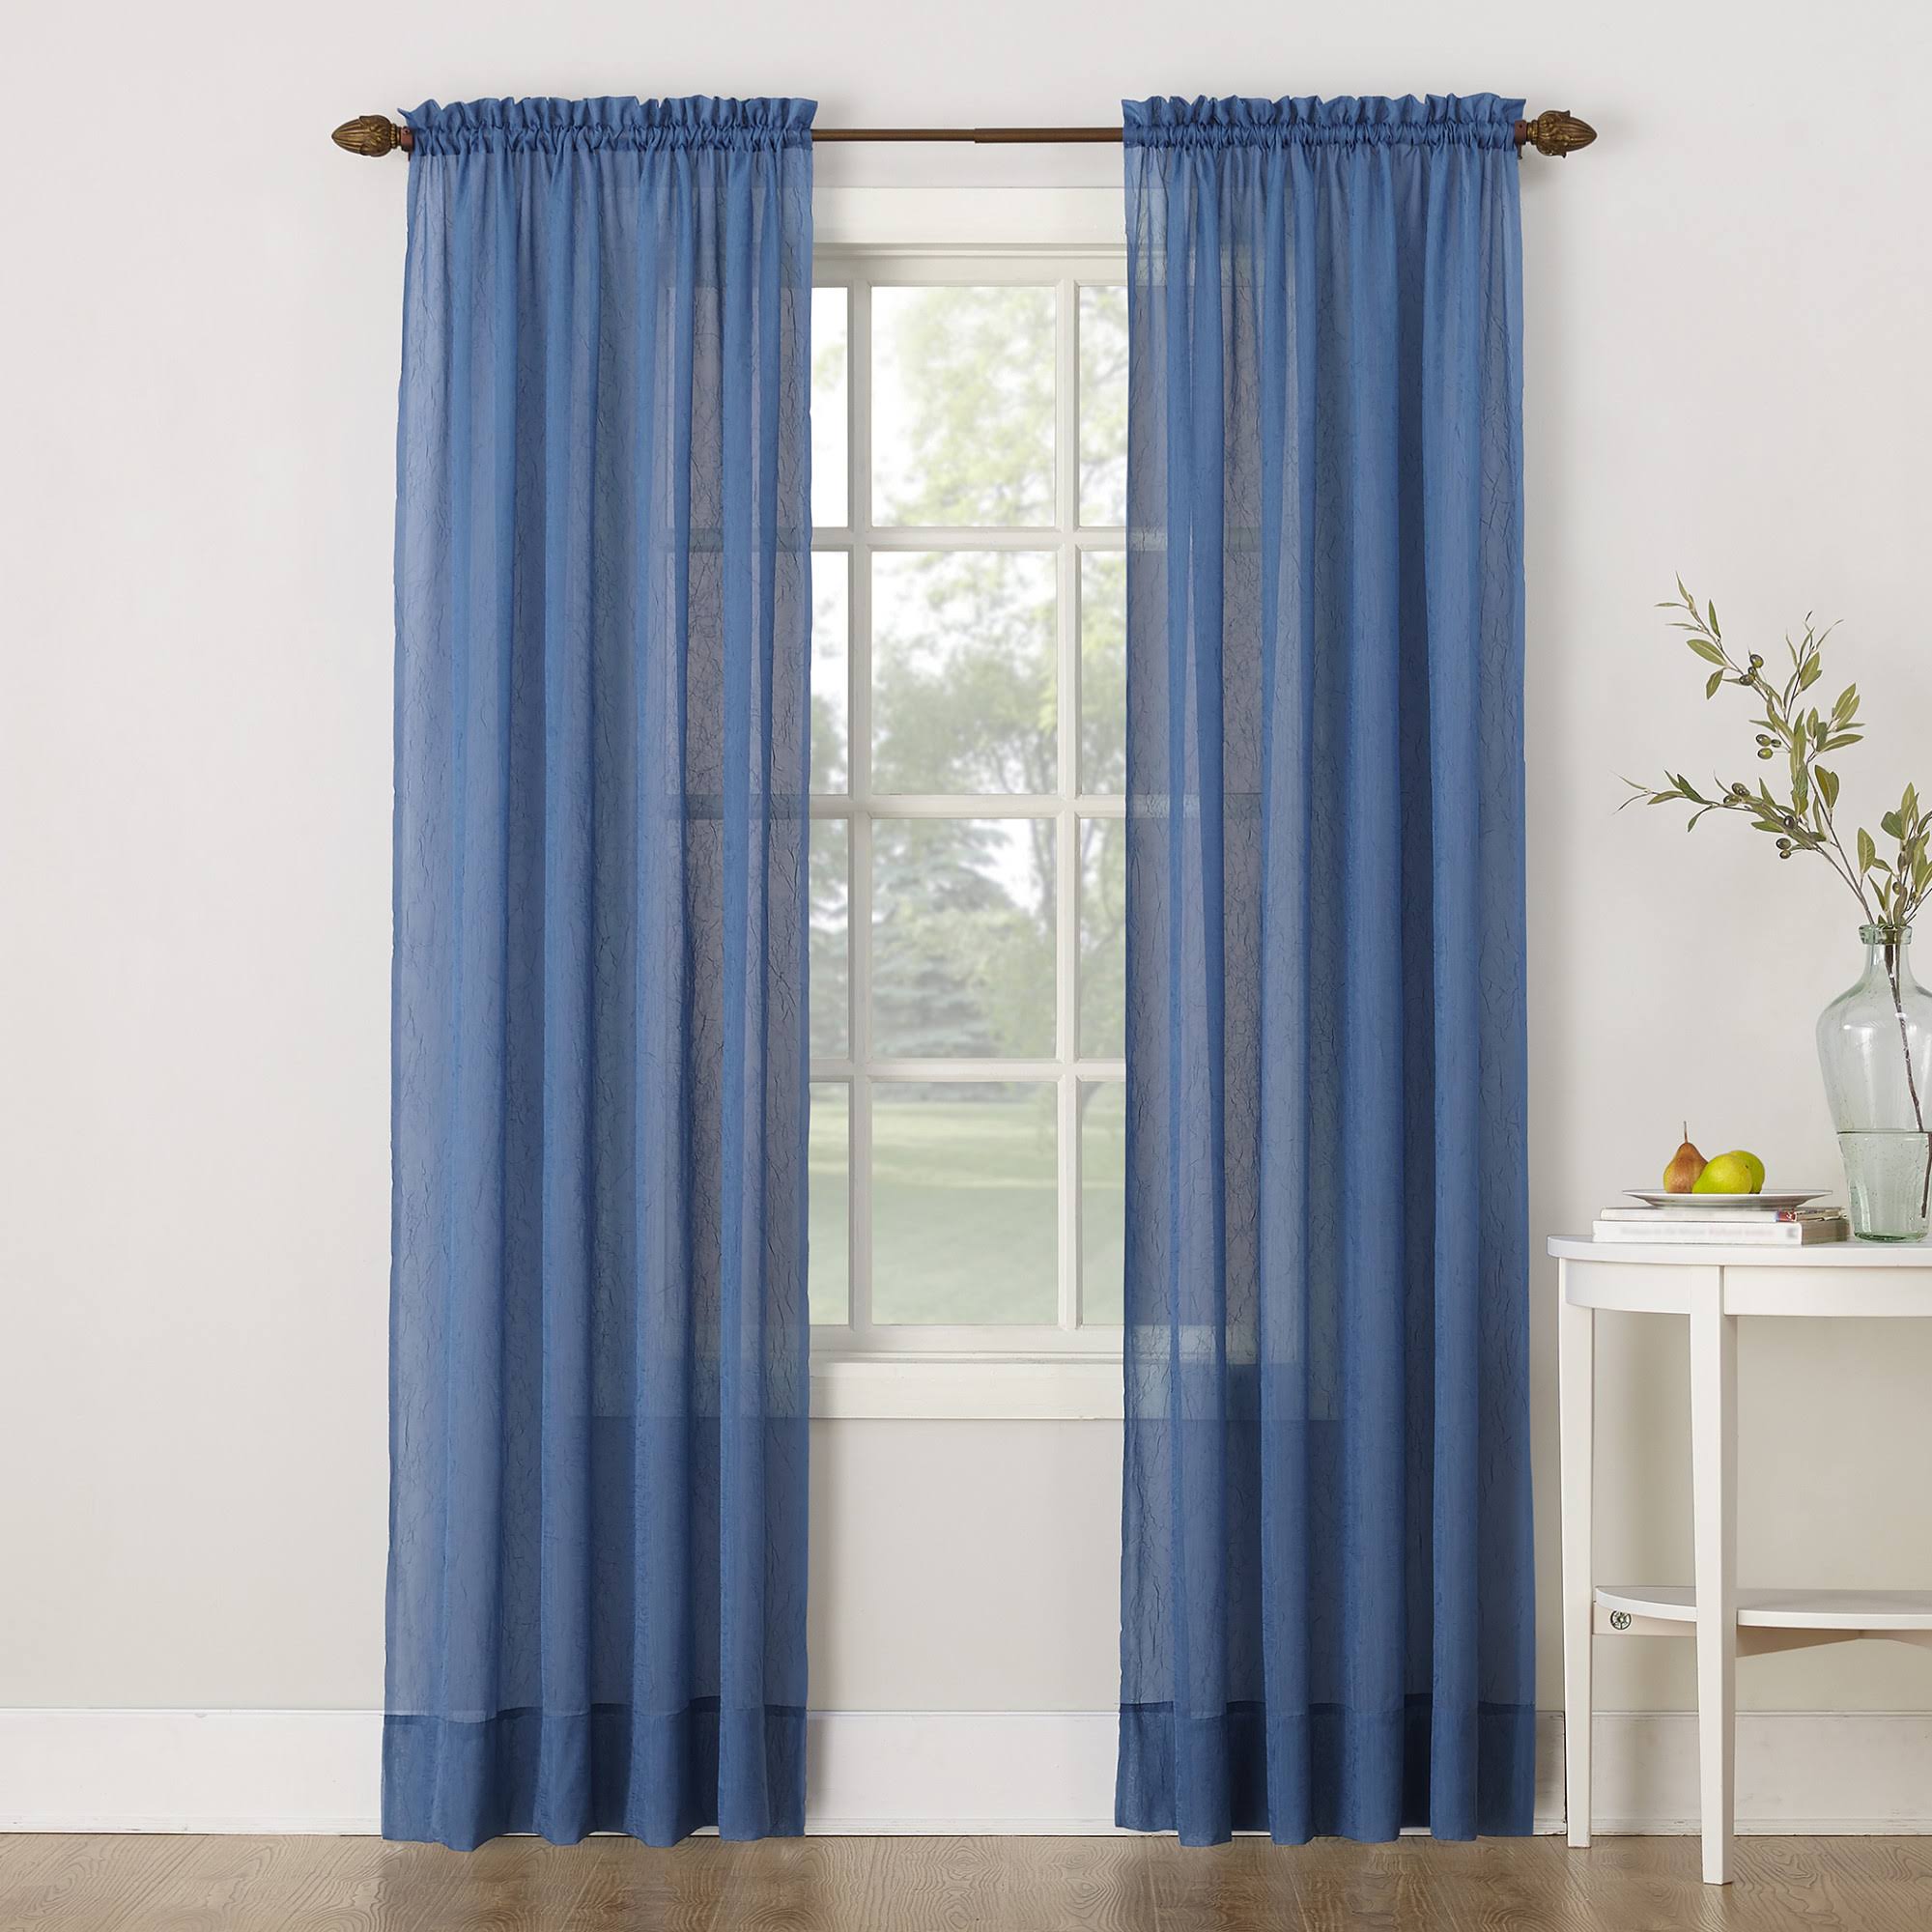 No. 918 Erica Crushed Sheer Voile Rod Pocket Curtain Panel | Decor